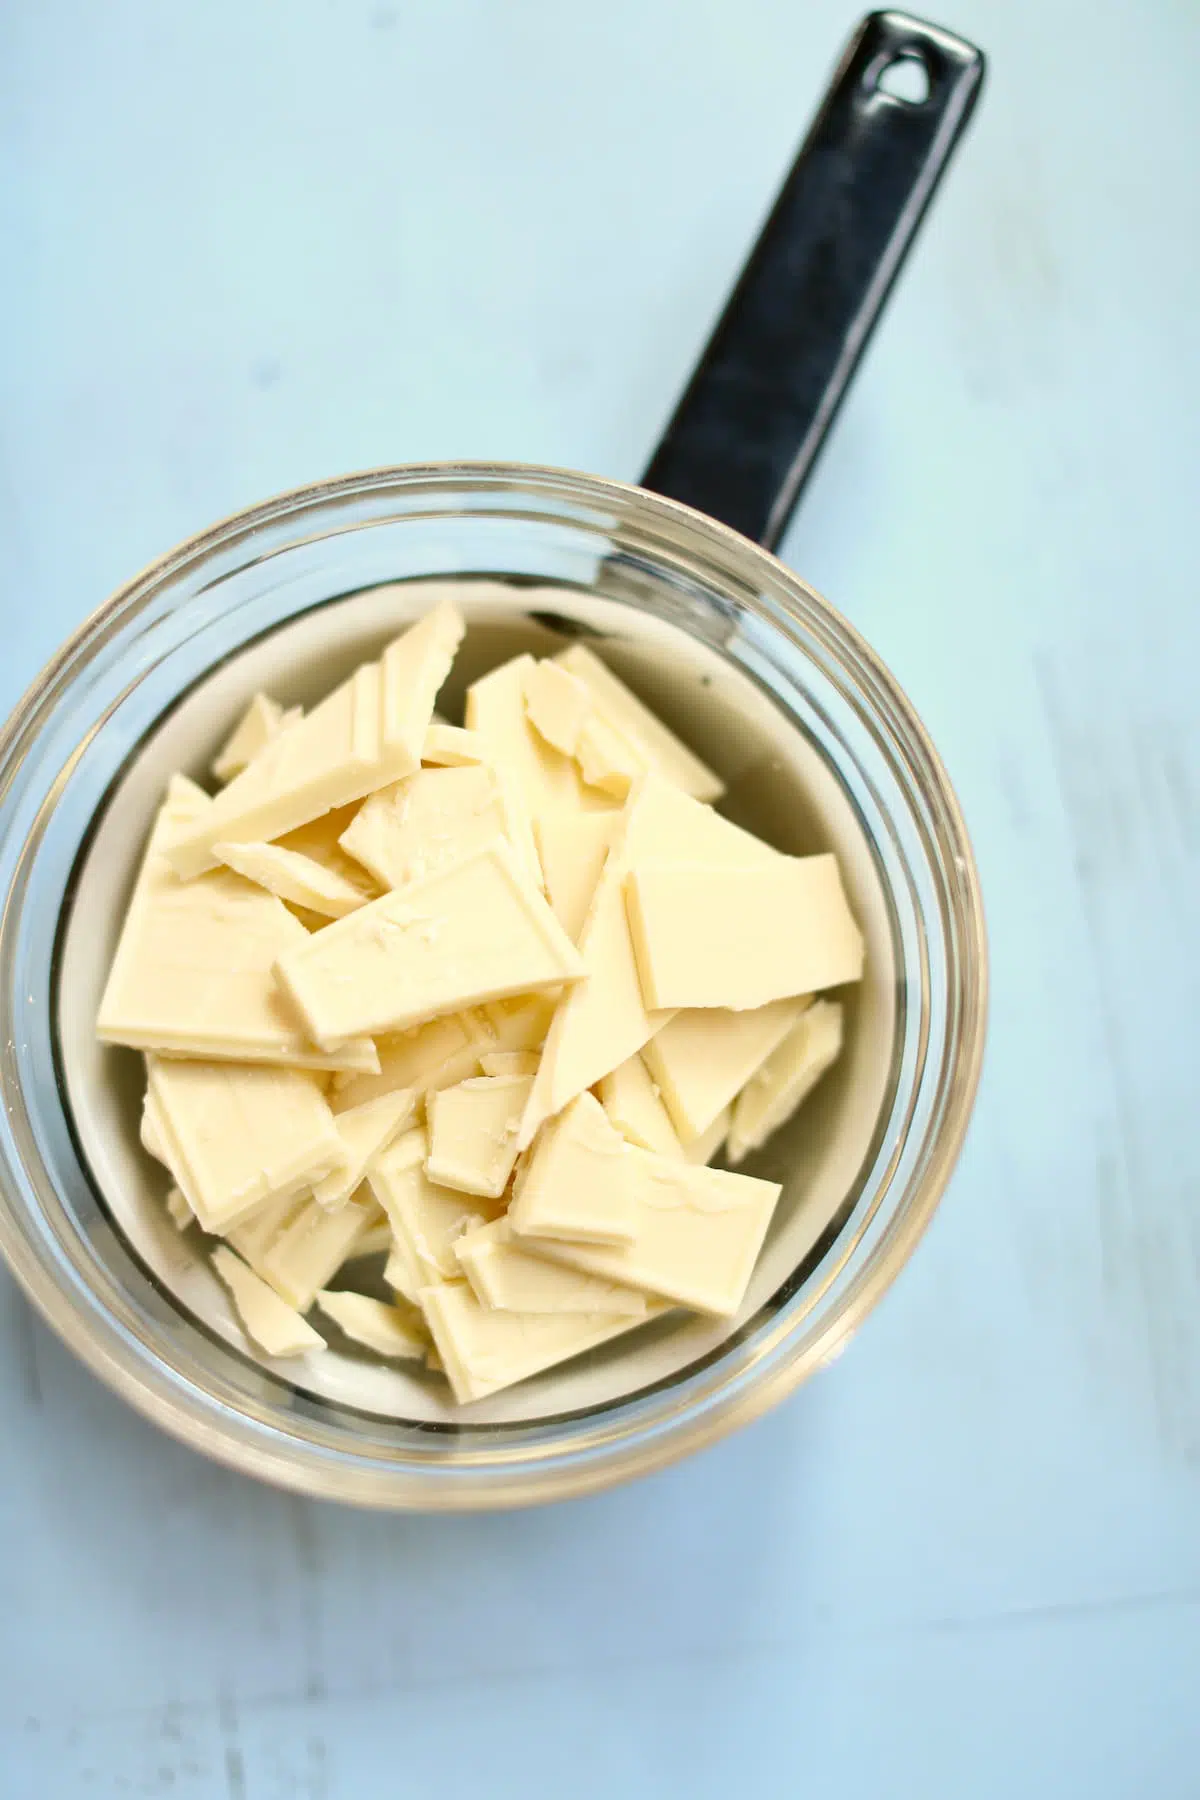 a glass bowl of white chocolate pieces.